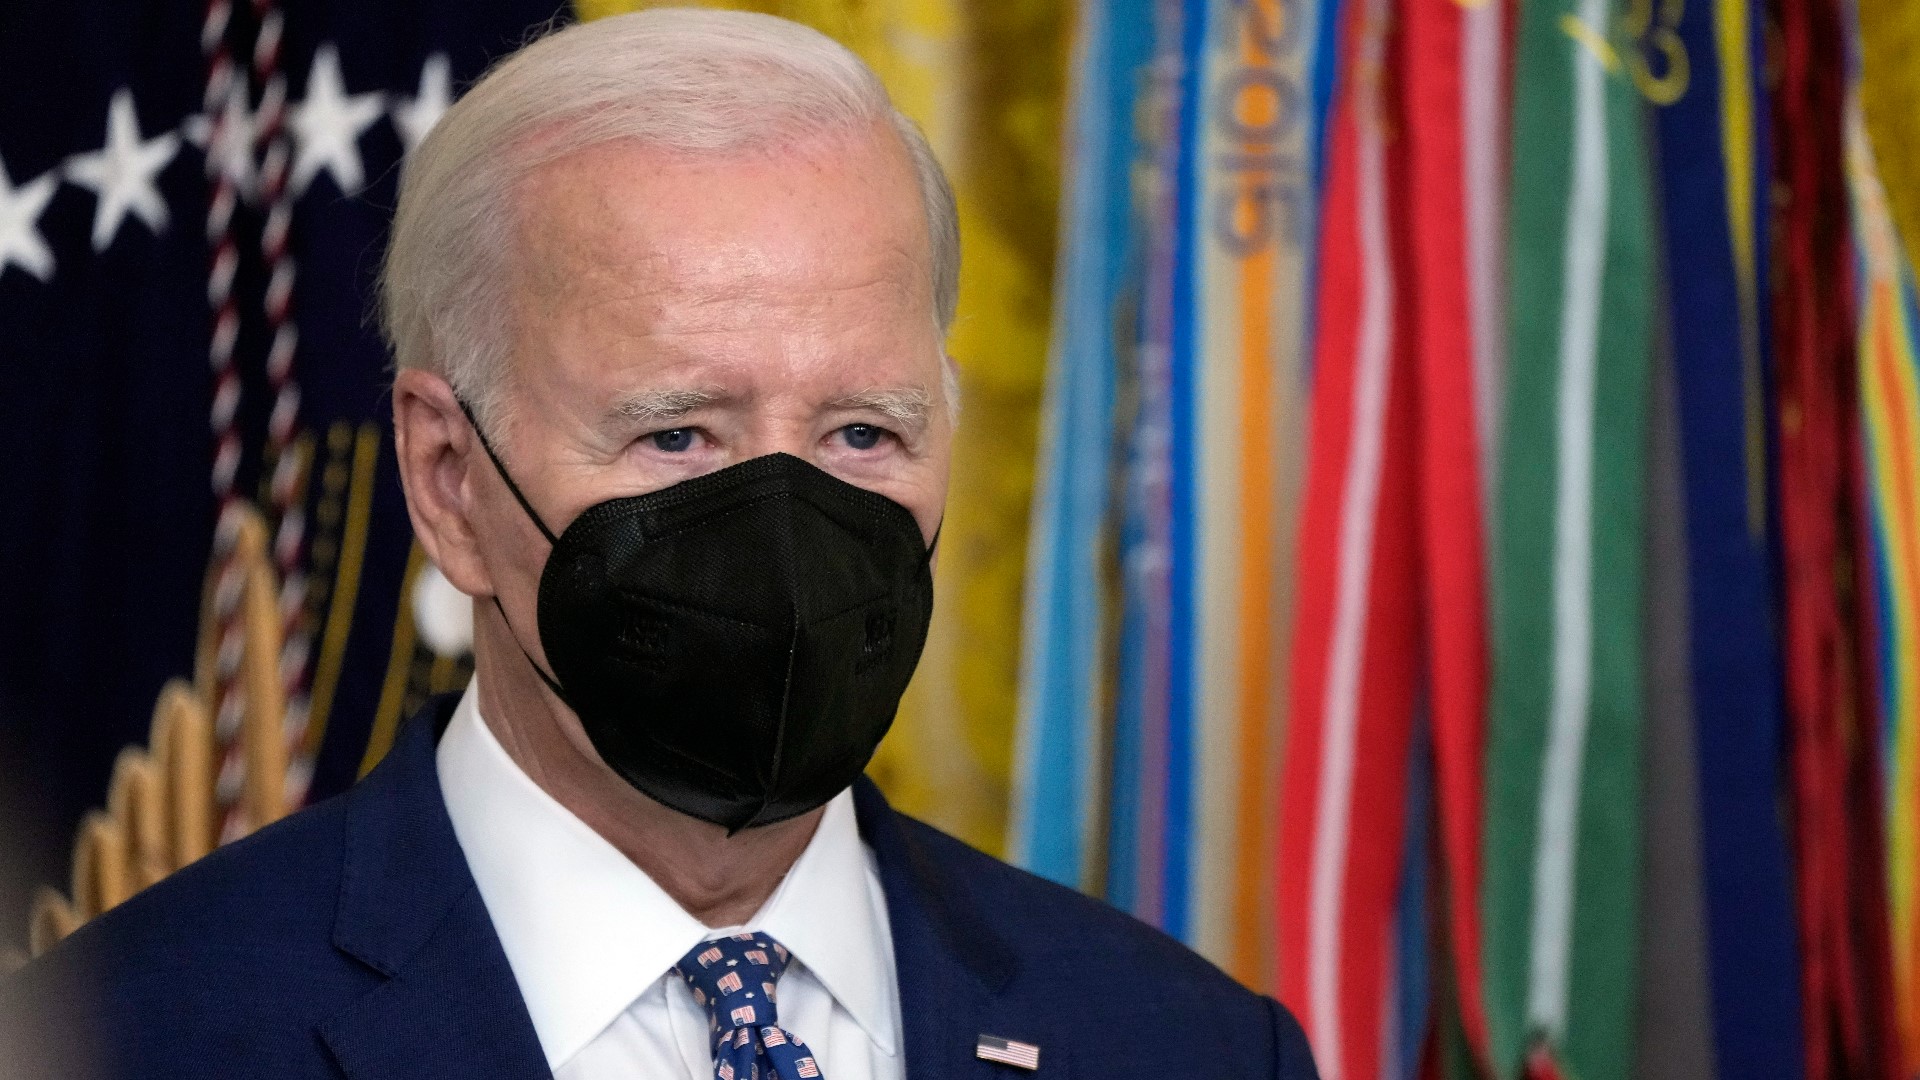 White House Press Secretary Karine Jean-Pierre said Biden would be following CDC protocols and would mask indoors unless he was far enough away from someone.